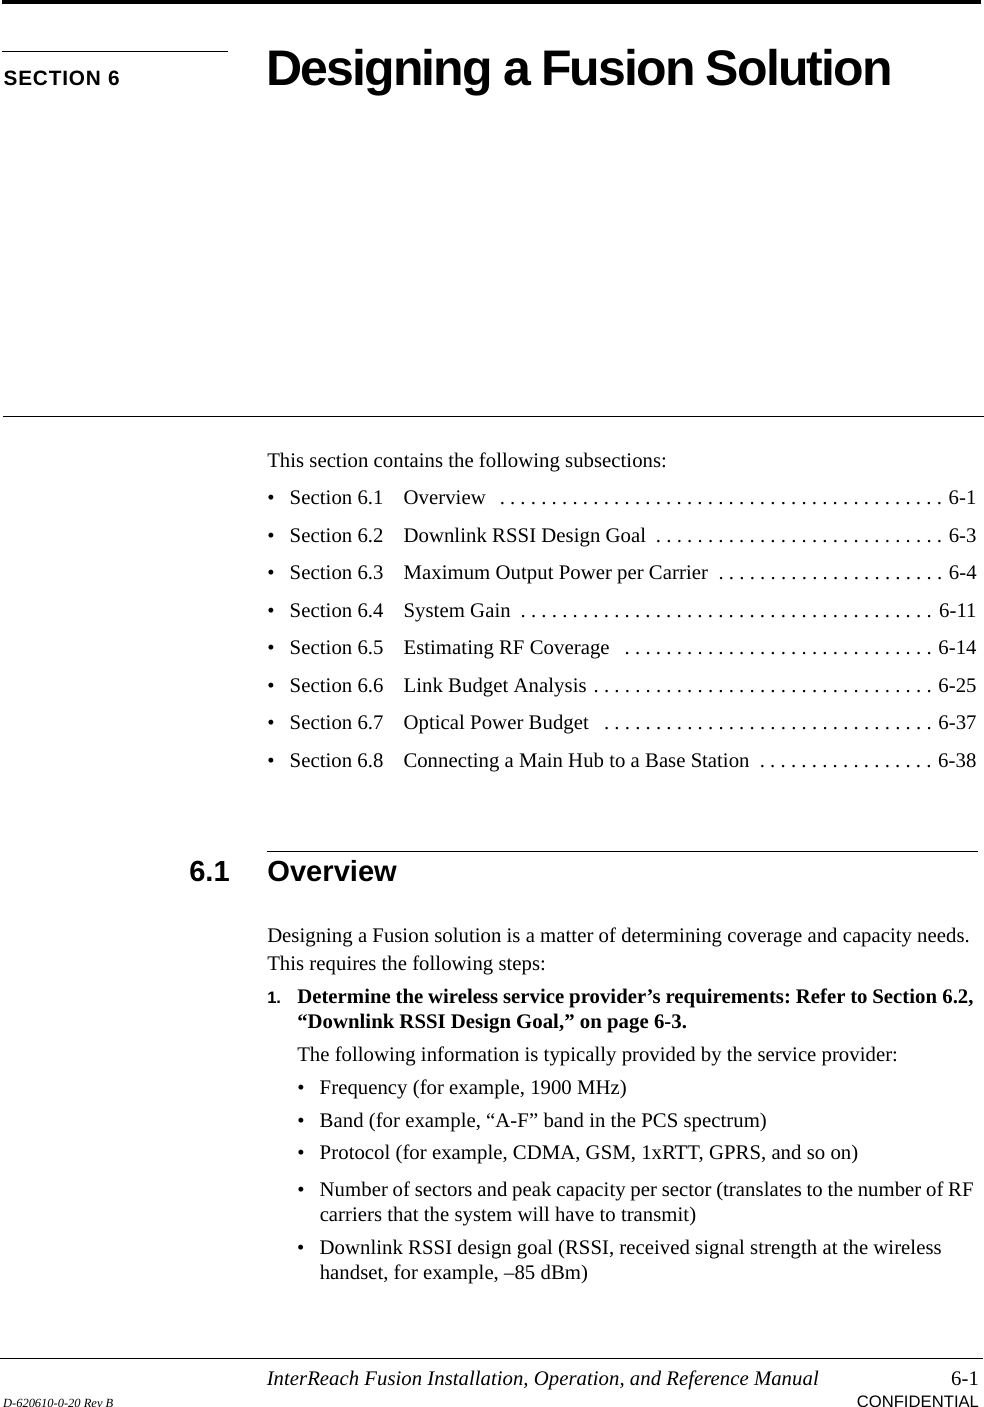 InterReach Fusion Installation, Operation, and Reference Manual 6-1D-620610-0-20 Rev B CONFIDENTIALSECTION 6 Designing a Fusion SolutionThis section contains the following subsections:• Section 6.1   Overview   . . . . . . . . . . . . . . . . . . . . . . . . . . . . . . . . . . . . . . . . . . . 6-1• Section 6.2   Downlink RSSI Design Goal  . . . . . . . . . . . . . . . . . . . . . . . . . . . . 6-3• Section 6.3   Maximum Output Power per Carrier  . . . . . . . . . . . . . . . . . . . . . . 6-4• Section 6.4   System Gain  . . . . . . . . . . . . . . . . . . . . . . . . . . . . . . . . . . . . . . . . 6-11• Section 6.5   Estimating RF Coverage   . . . . . . . . . . . . . . . . . . . . . . . . . . . . . . 6-14• Section 6.6   Link Budget Analysis . . . . . . . . . . . . . . . . . . . . . . . . . . . . . . . . . 6-25• Section 6.7   Optical Power Budget   . . . . . . . . . . . . . . . . . . . . . . . . . . . . . . . . 6-37• Section 6.8   Connecting a Main Hub to a Base Station  . . . . . . . . . . . . . . . . . 6-386.1 OverviewDesigning a Fusion solution is a matter of determining coverage and capacity needs. This requires the following steps:1. Determine the wireless service provider’s requirements: Refer to Section 6.2, “Downlink RSSI Design Goal,” on page 6-3.The following information is typically provided by the service provider:• Frequency (for example, 1900 MHz)• Band (for example, “A-F” band in the PCS spectrum)• Protocol (for example, CDMA, GSM, 1xRTT, GPRS, and so on)• Number of sectors and peak capacity per sector (translates to the number of RF carriers that the system will have to transmit)• Downlink RSSI design goal (RSSI, received signal strength at the wireless handset, for example, –85 dBm)